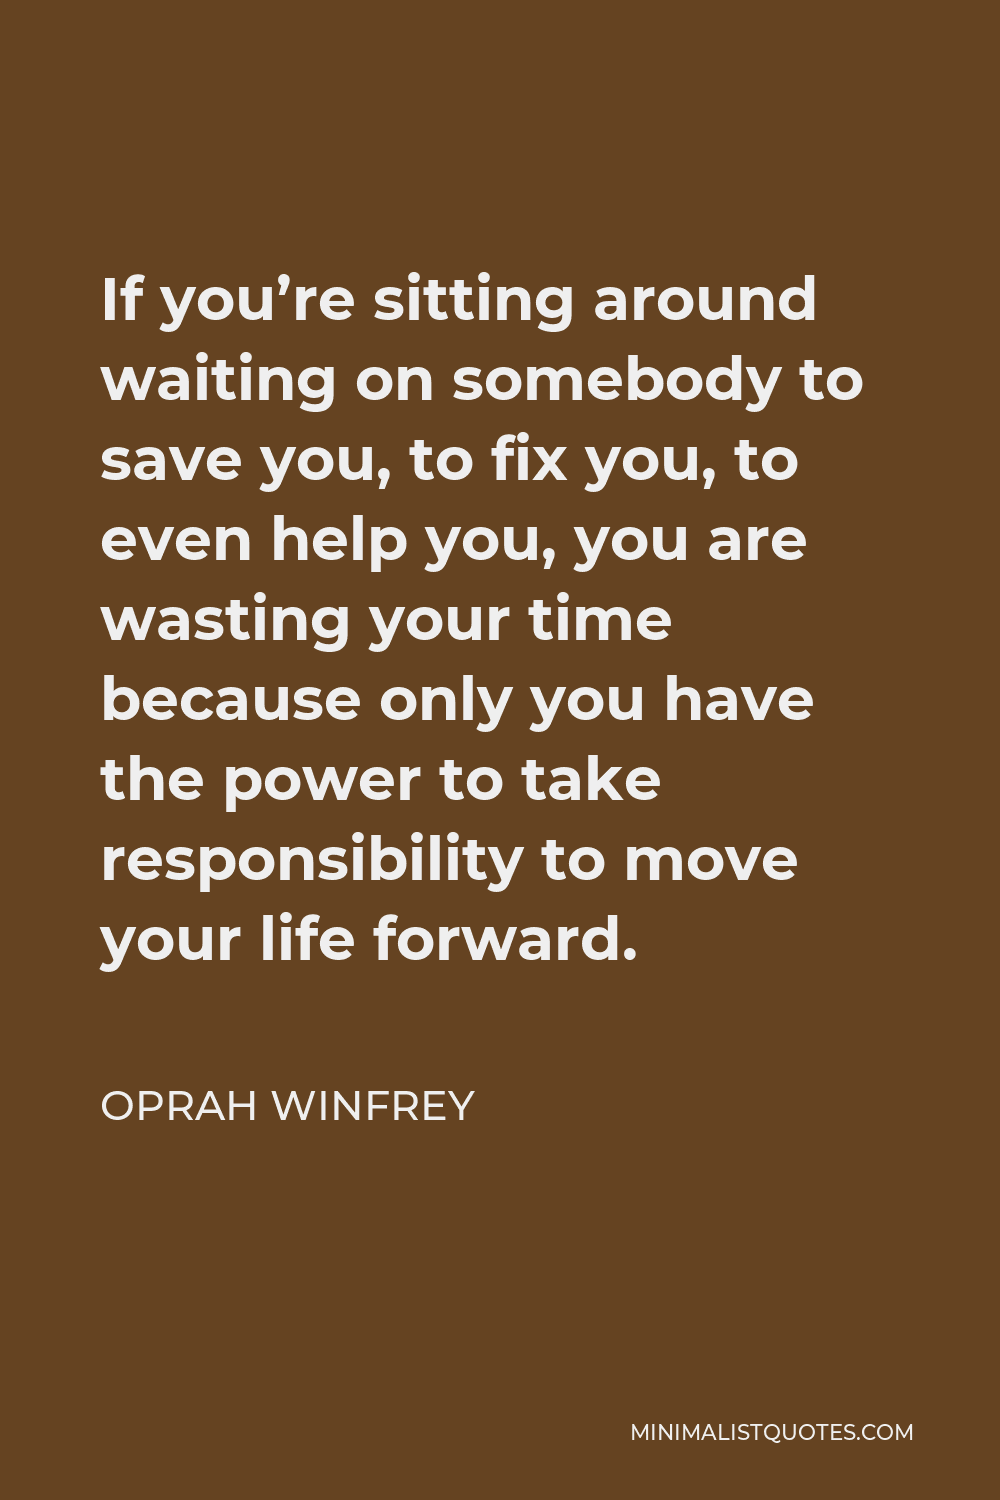 Oprah Winfrey Quote - If you’re sitting around waiting on somebody to save you, to fix you, to even help you, you are wasting your time because only you have the power to take responsibility to move your life forward.